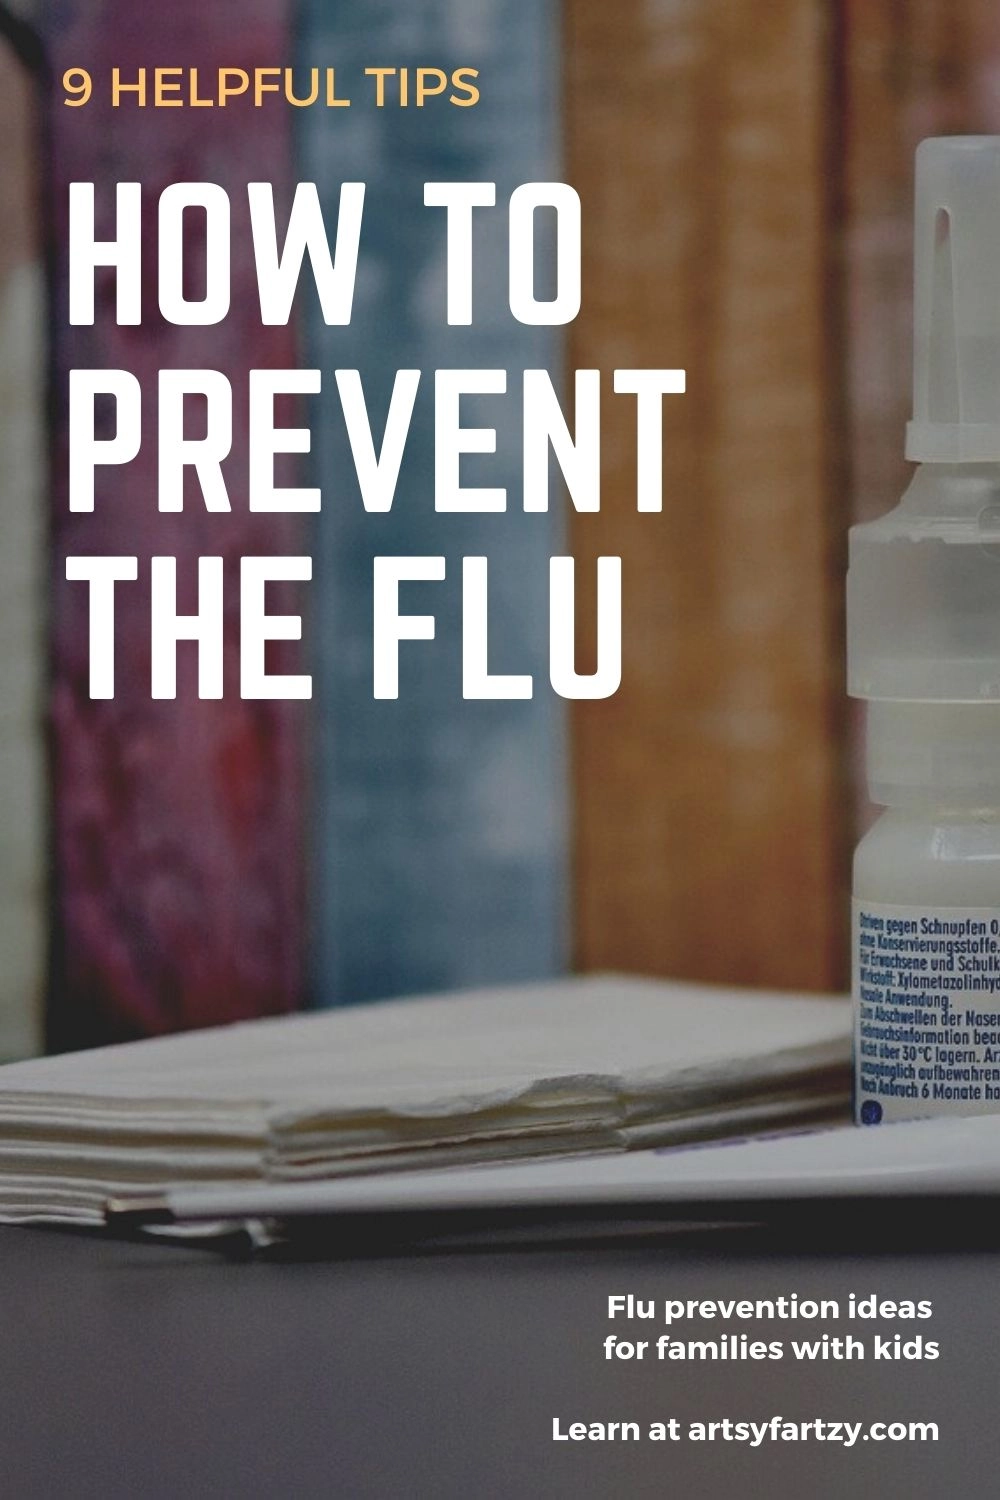 Use these 9 helpful tips on how to prevent the flu for families with kids